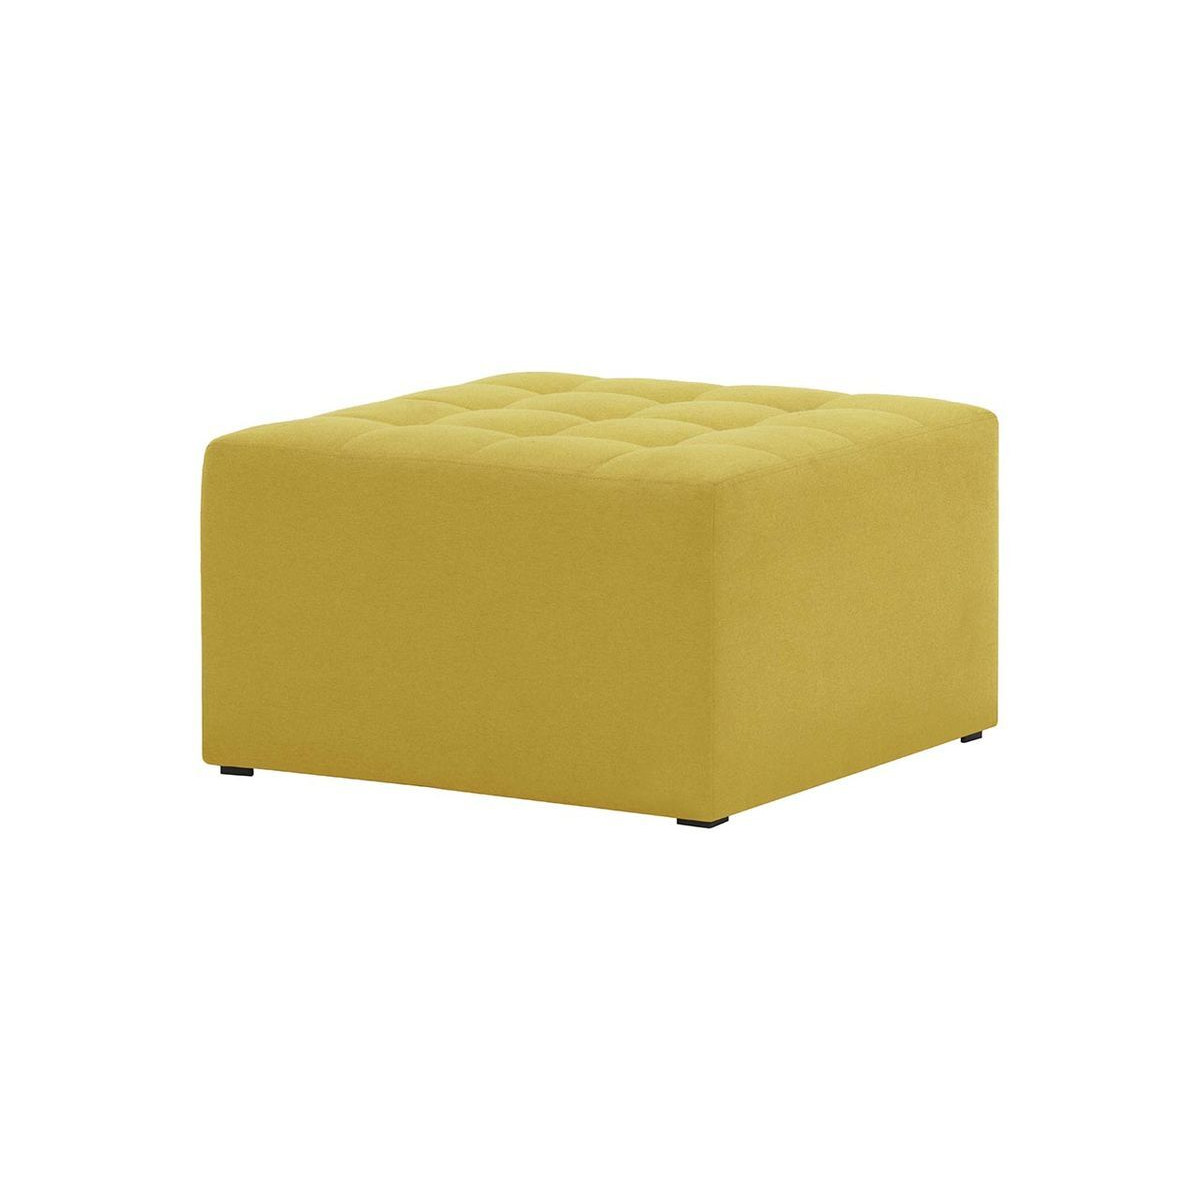 Flair Medium Square Pouffe with Stitching, yellow - image 1